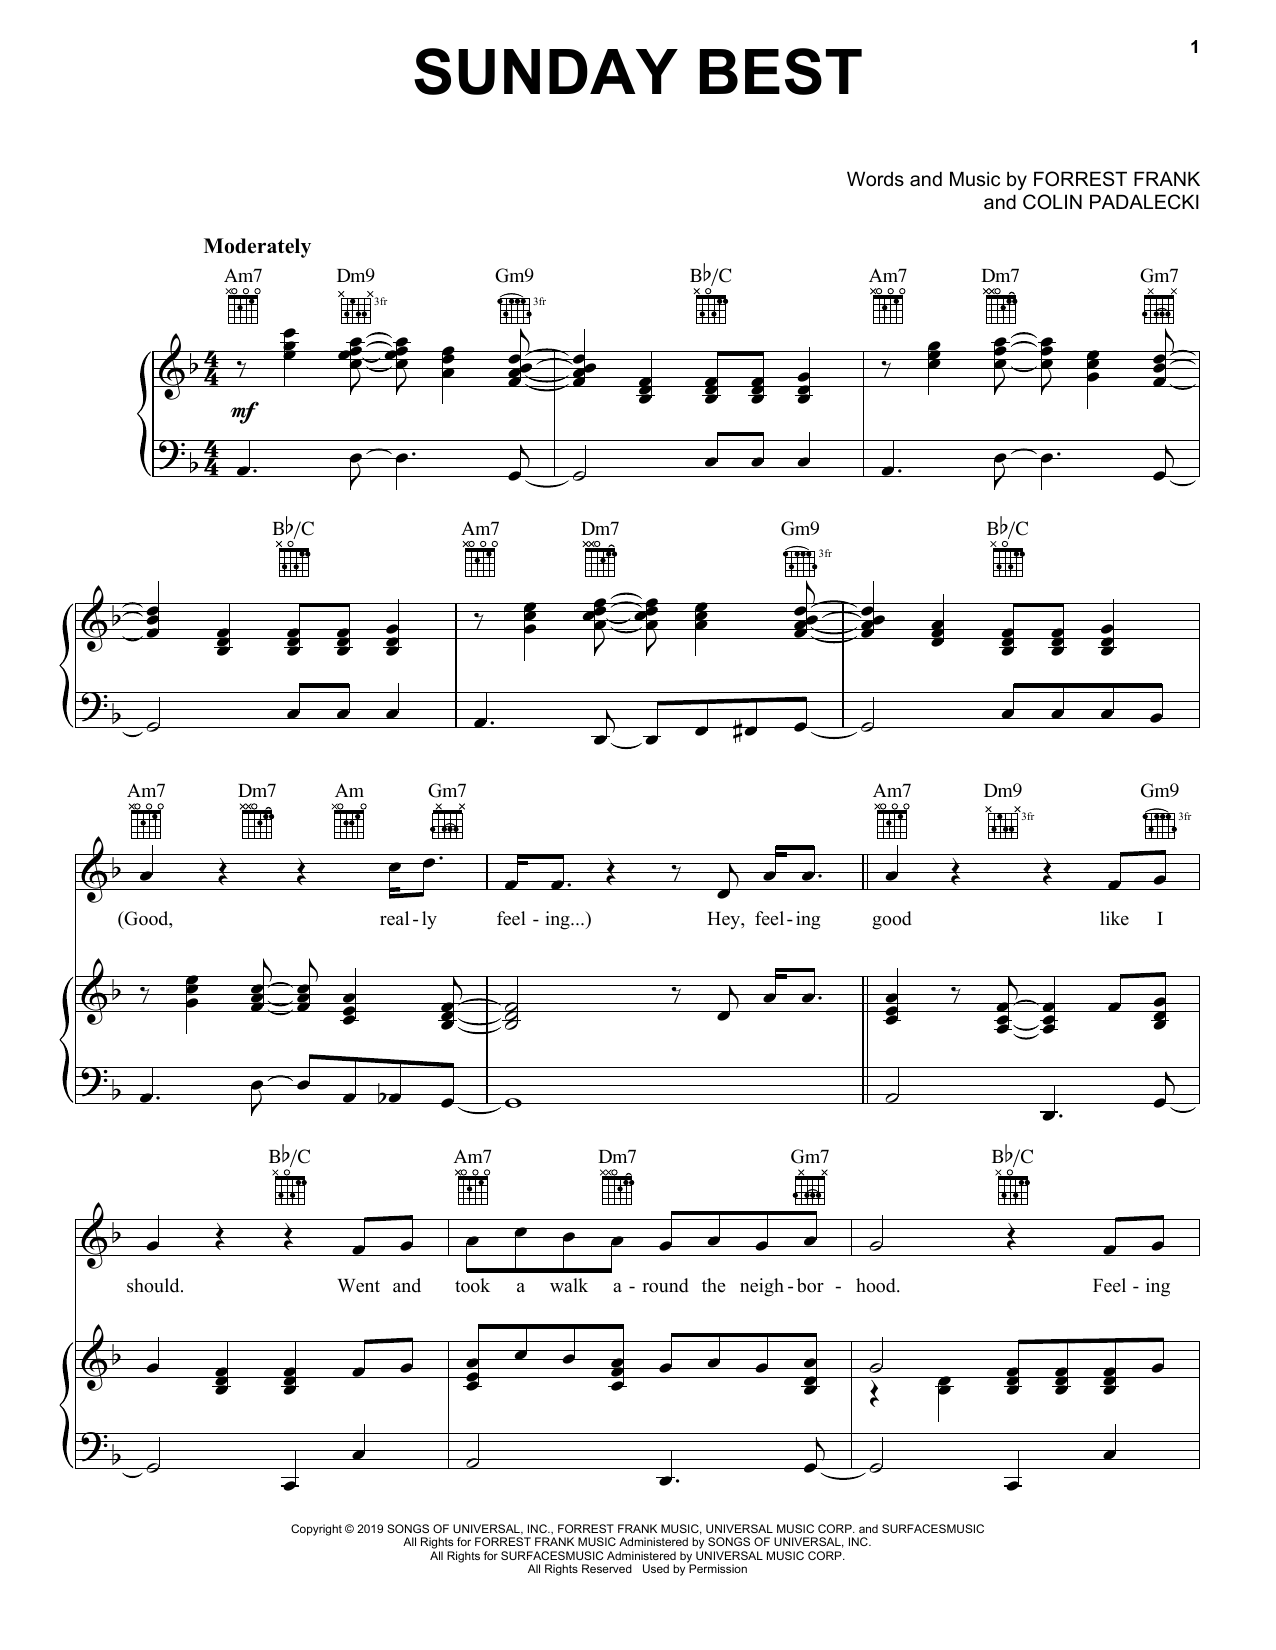 Download Surfaces Sunday Best Sheet Music